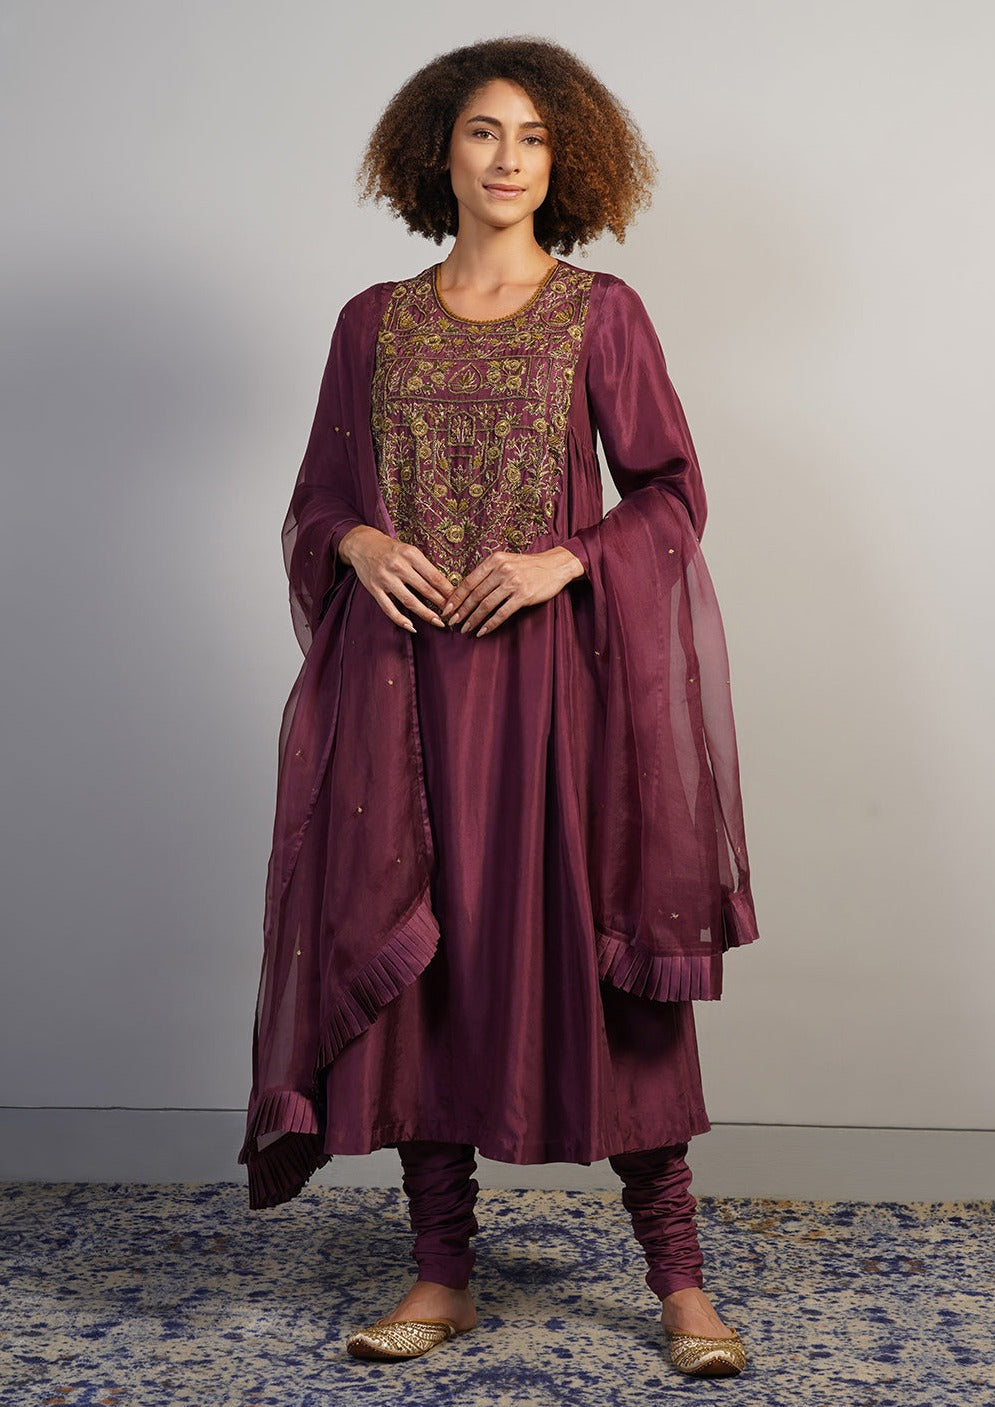 A beautiful deep wine A-line, round neck kurta set with gathers on the sides and intricate gold zardosi embroidery